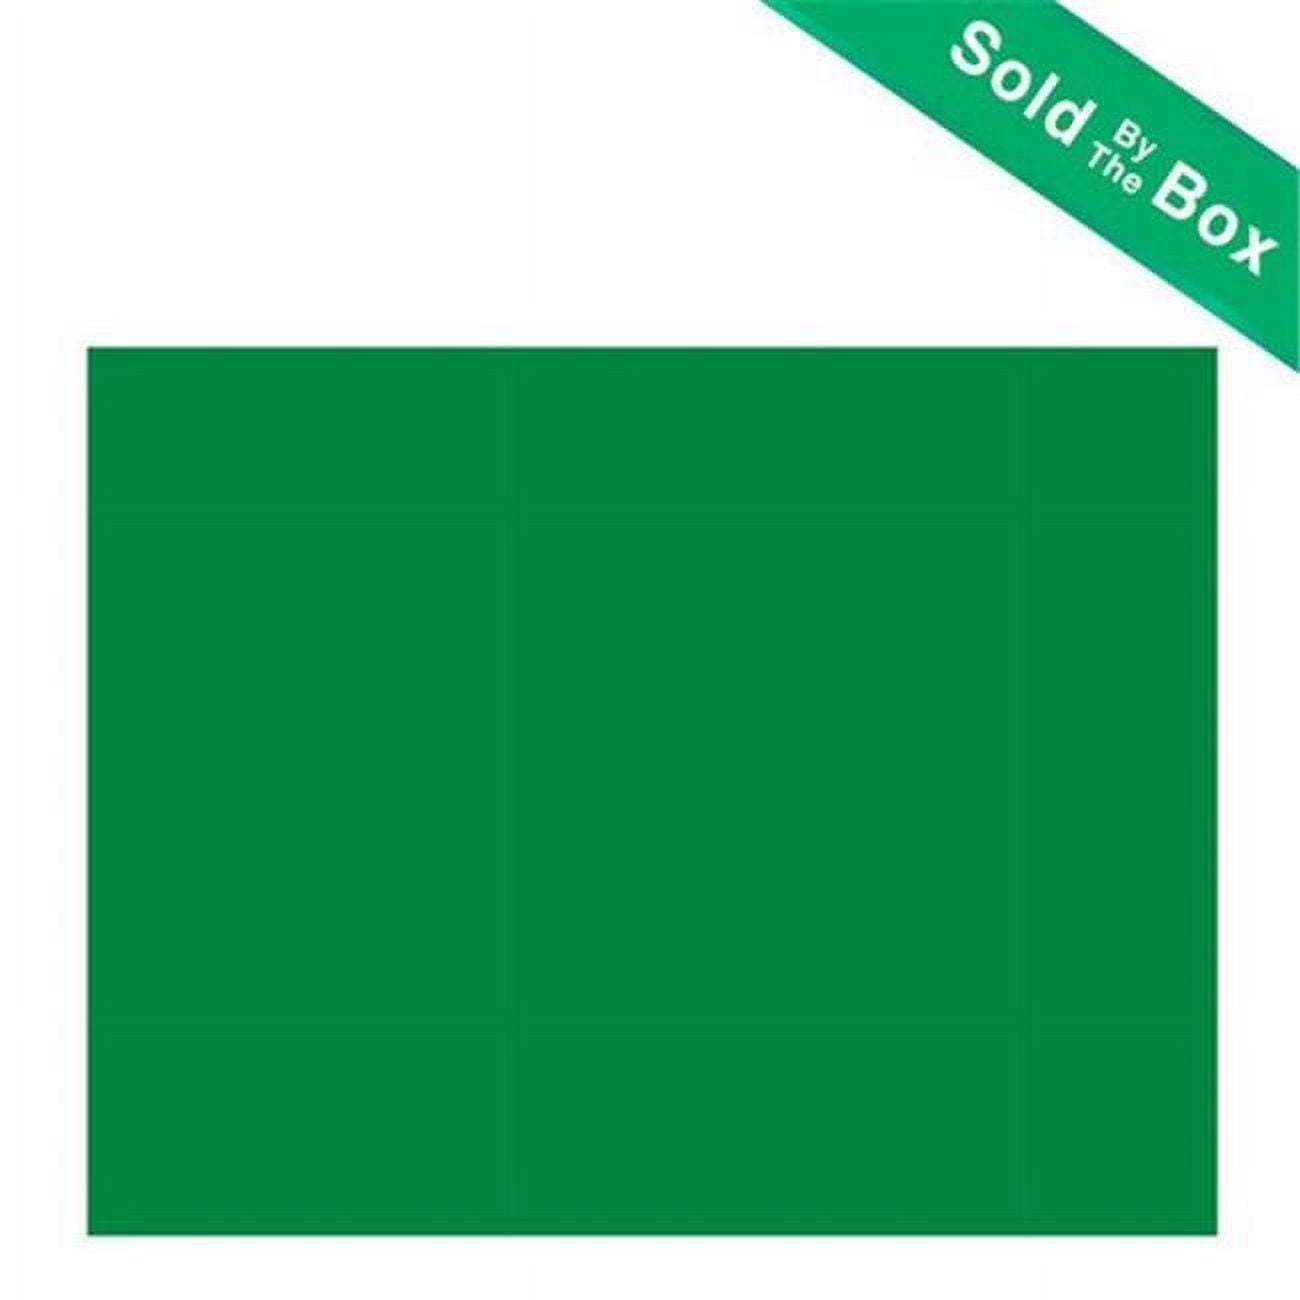 Pacon Poster Board Class Pack, 22 x 28, Assorted Colors, 50 Sheets